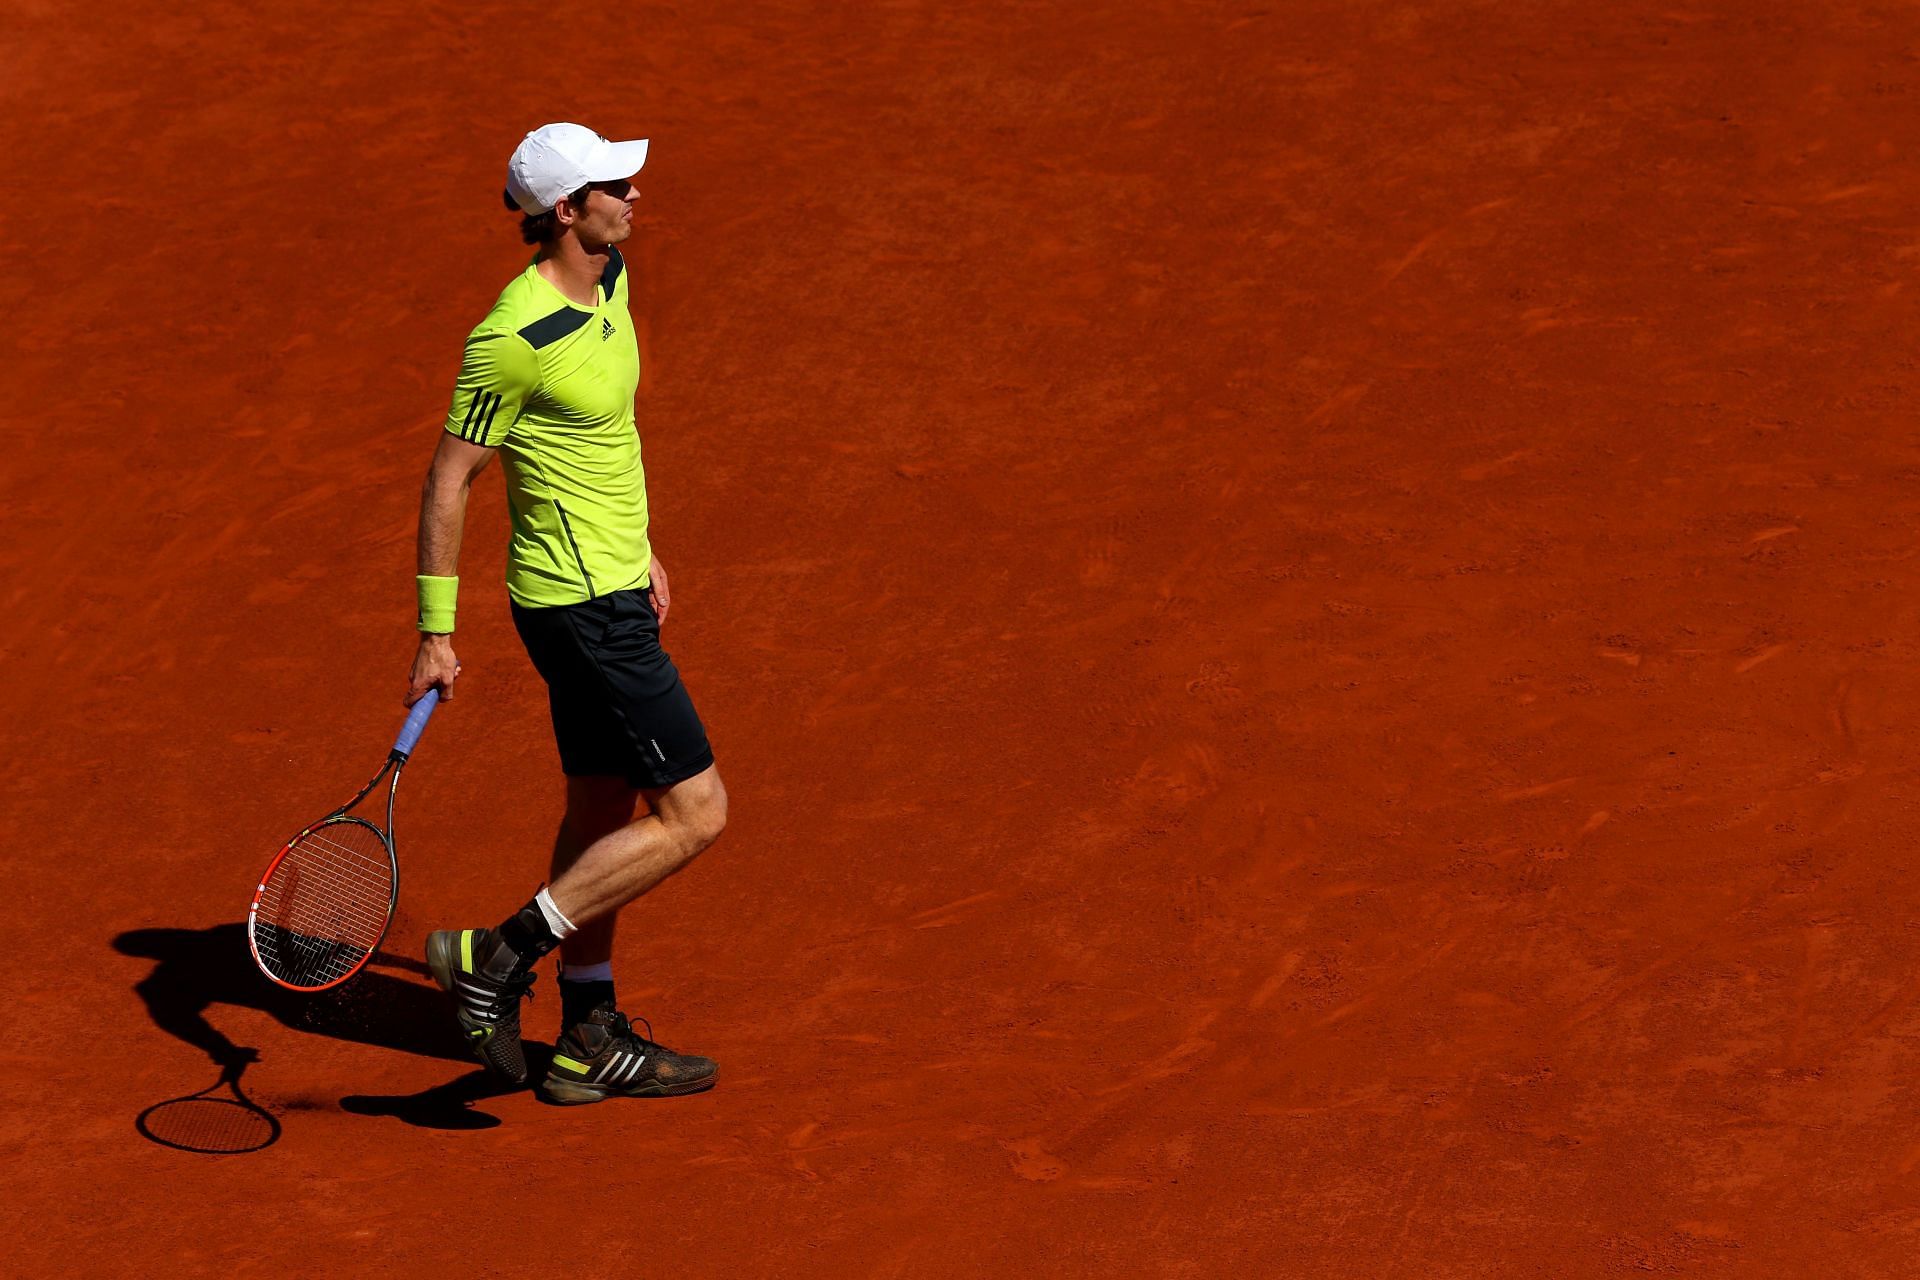 Murray is now apprehensive of playing on claycourt owing to previous injuries